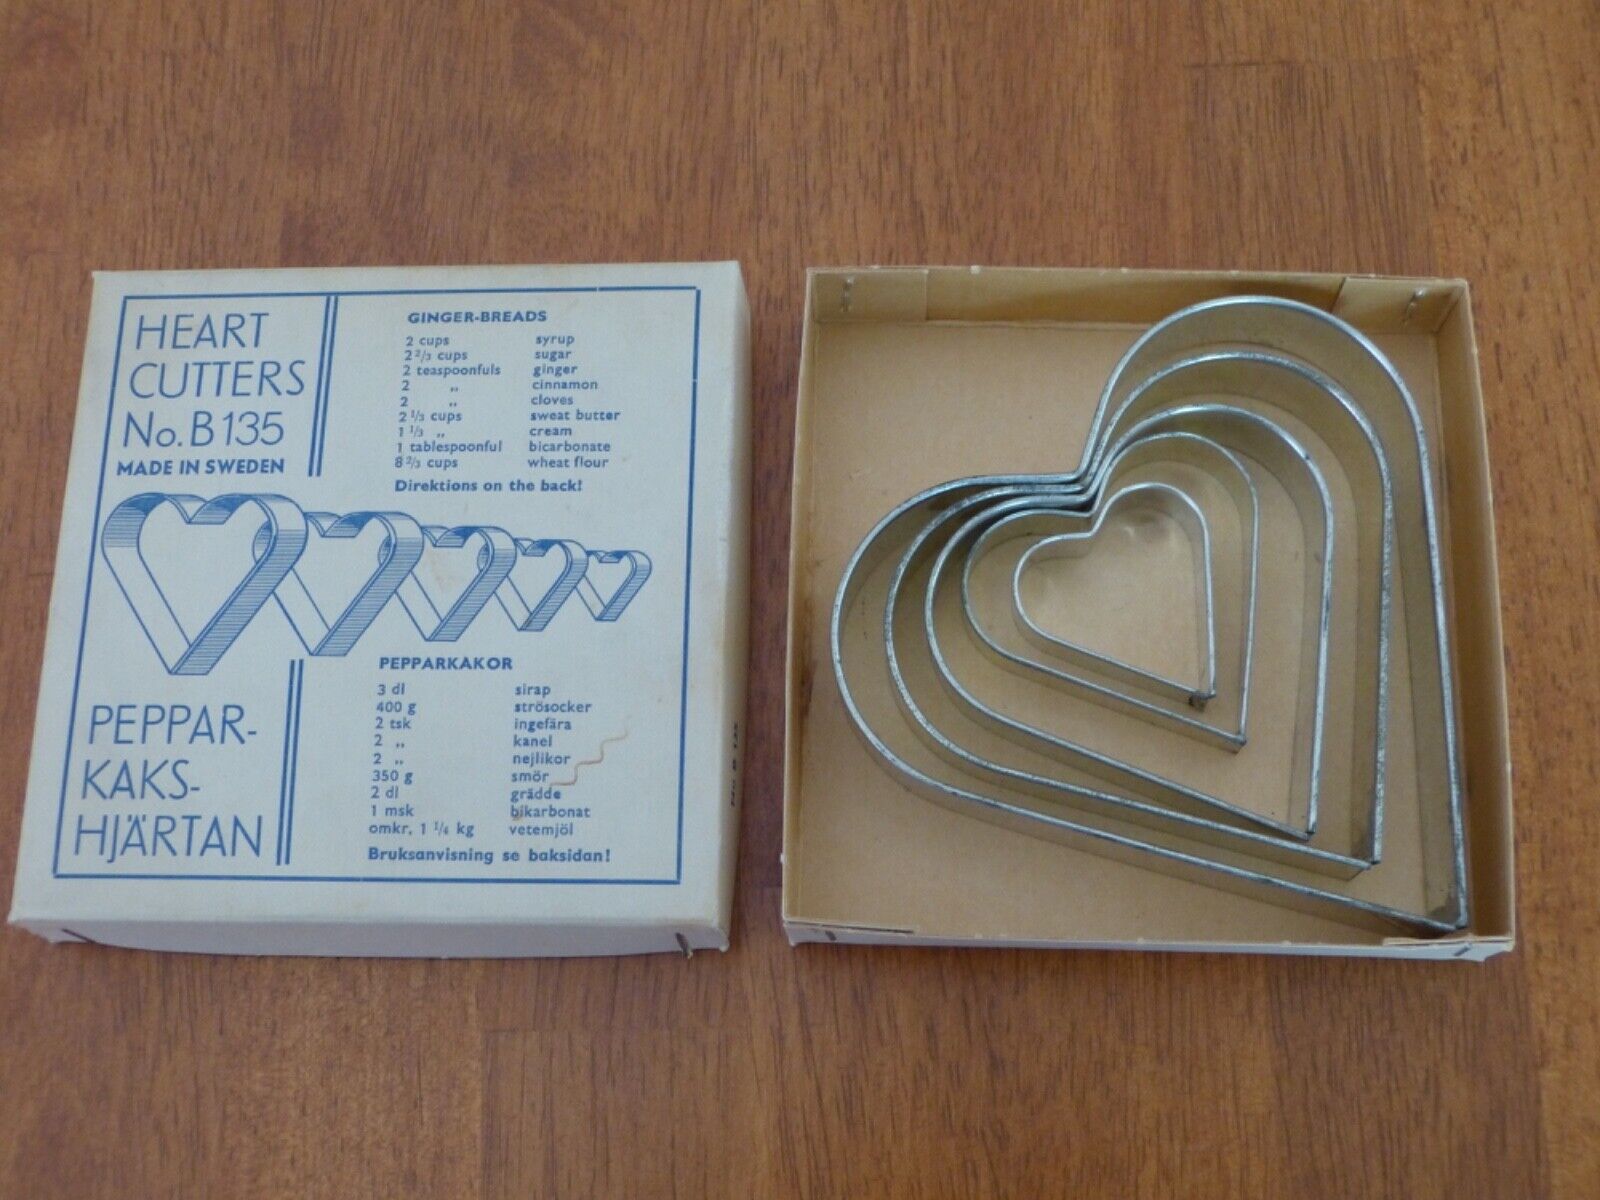 Early Set of 5 Nesting Heart-Shaped Cookie Cutters No B135, Factory Box, Sweden